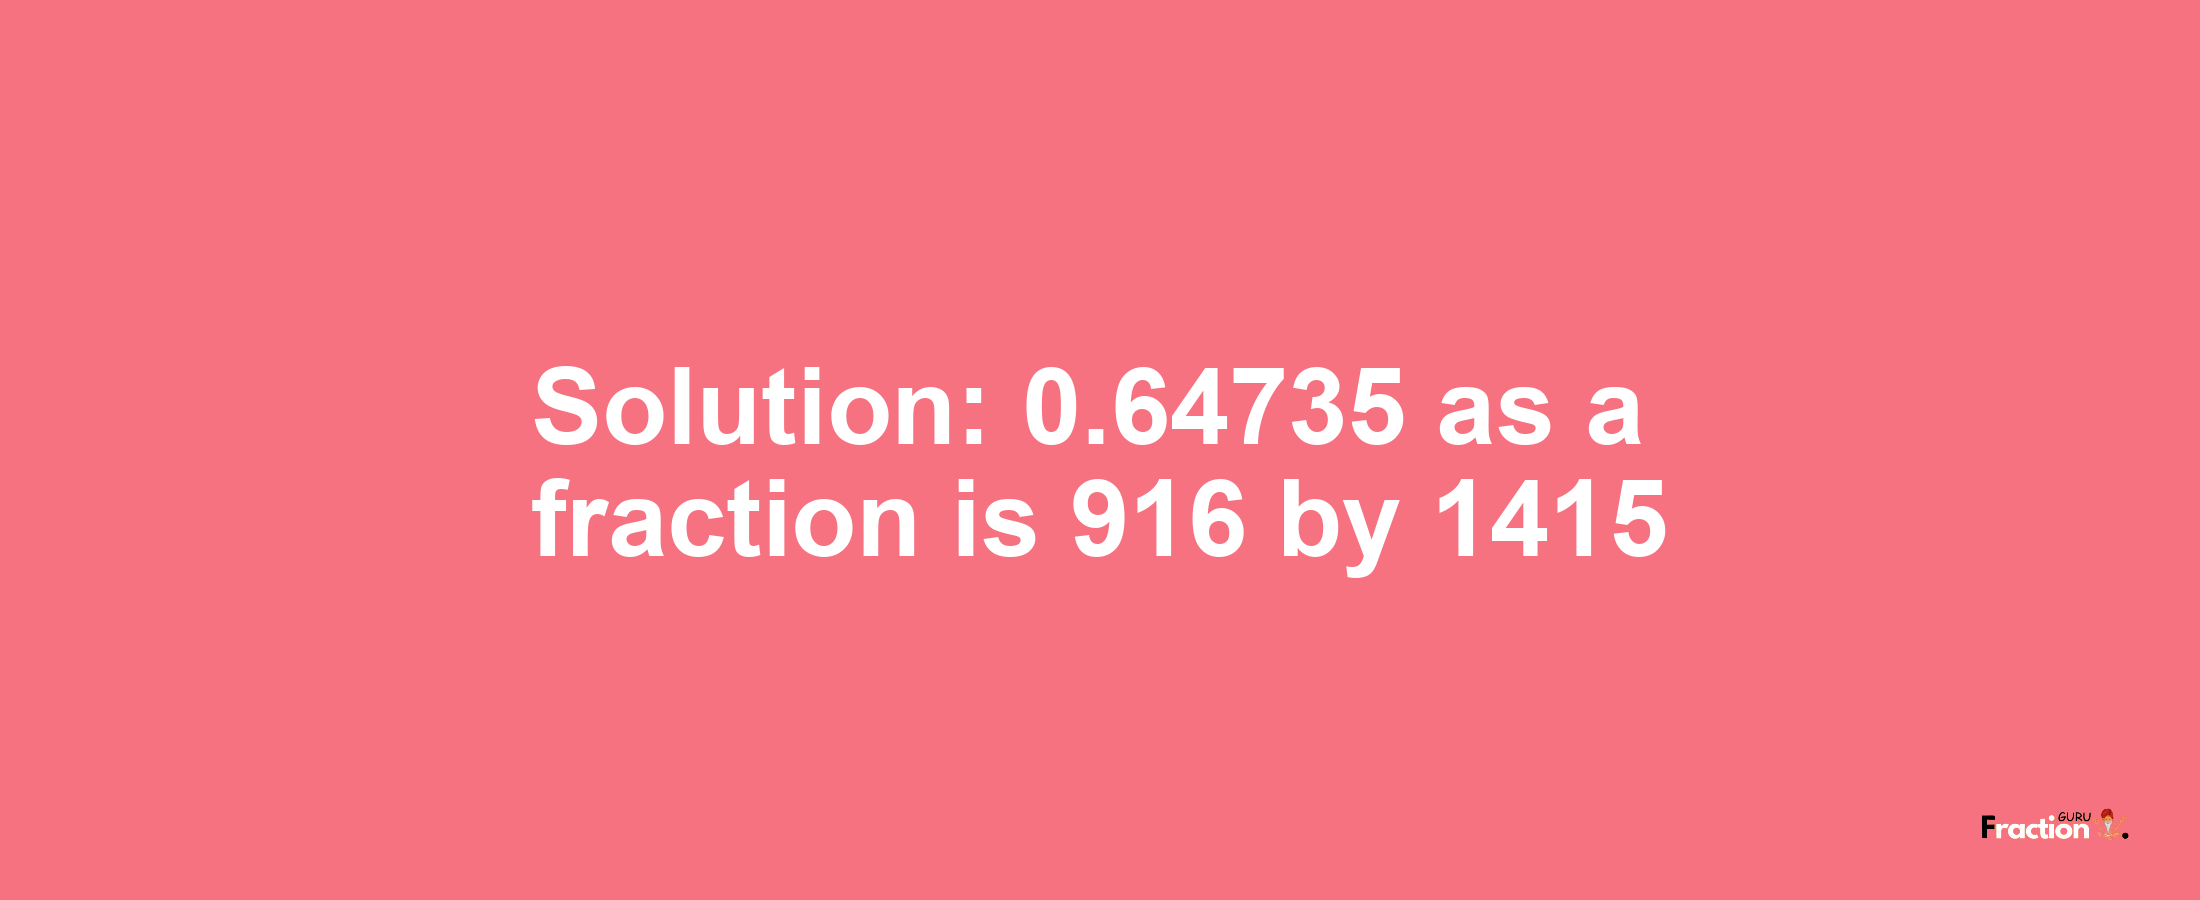 Solution:0.64735 as a fraction is 916/1415